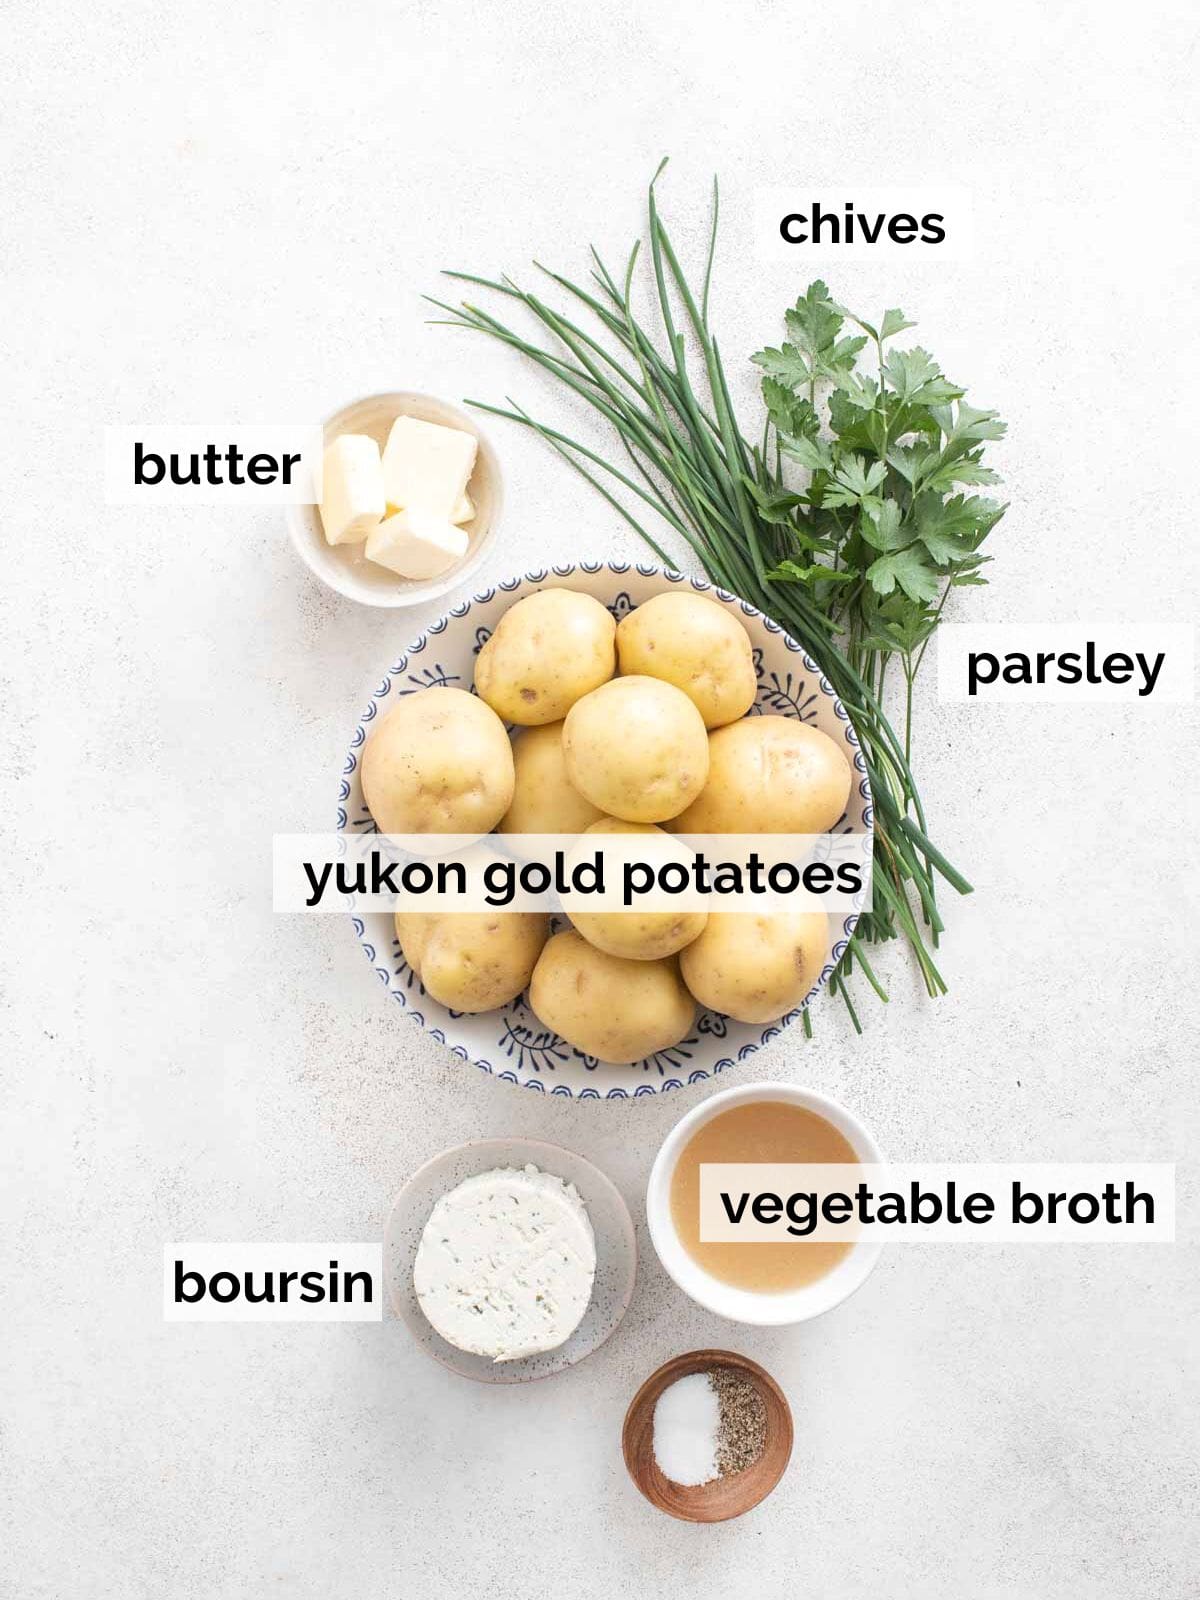 Potatoes, herbs, and boursin cheese with vegetable broth on a white background.